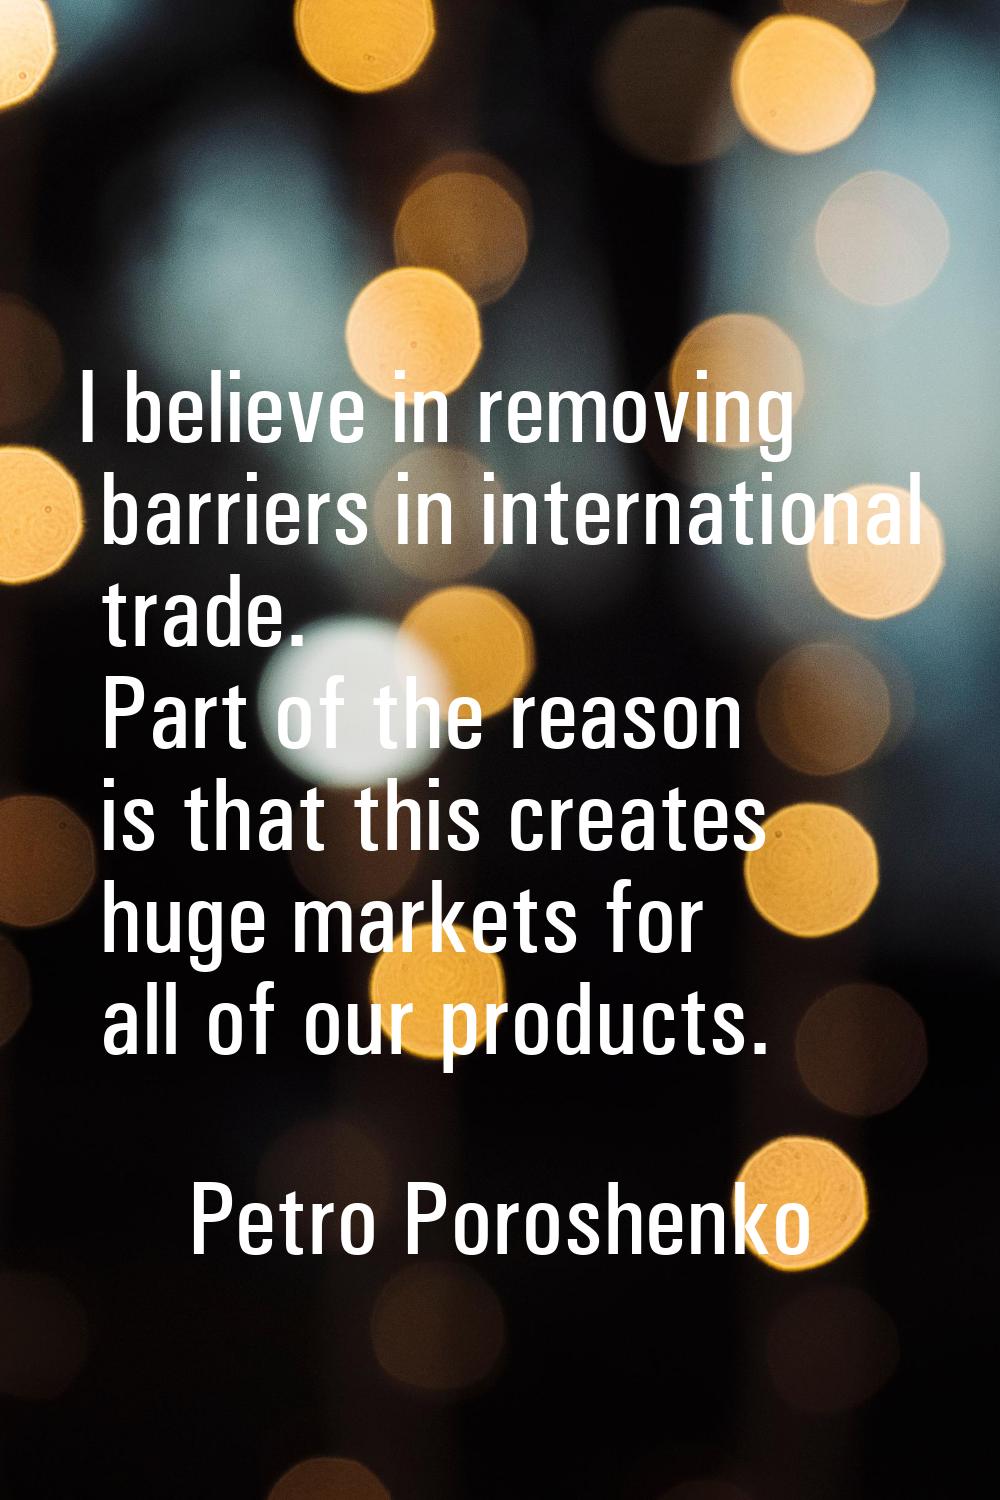 I believe in removing barriers in international trade. Part of the reason is that this creates huge